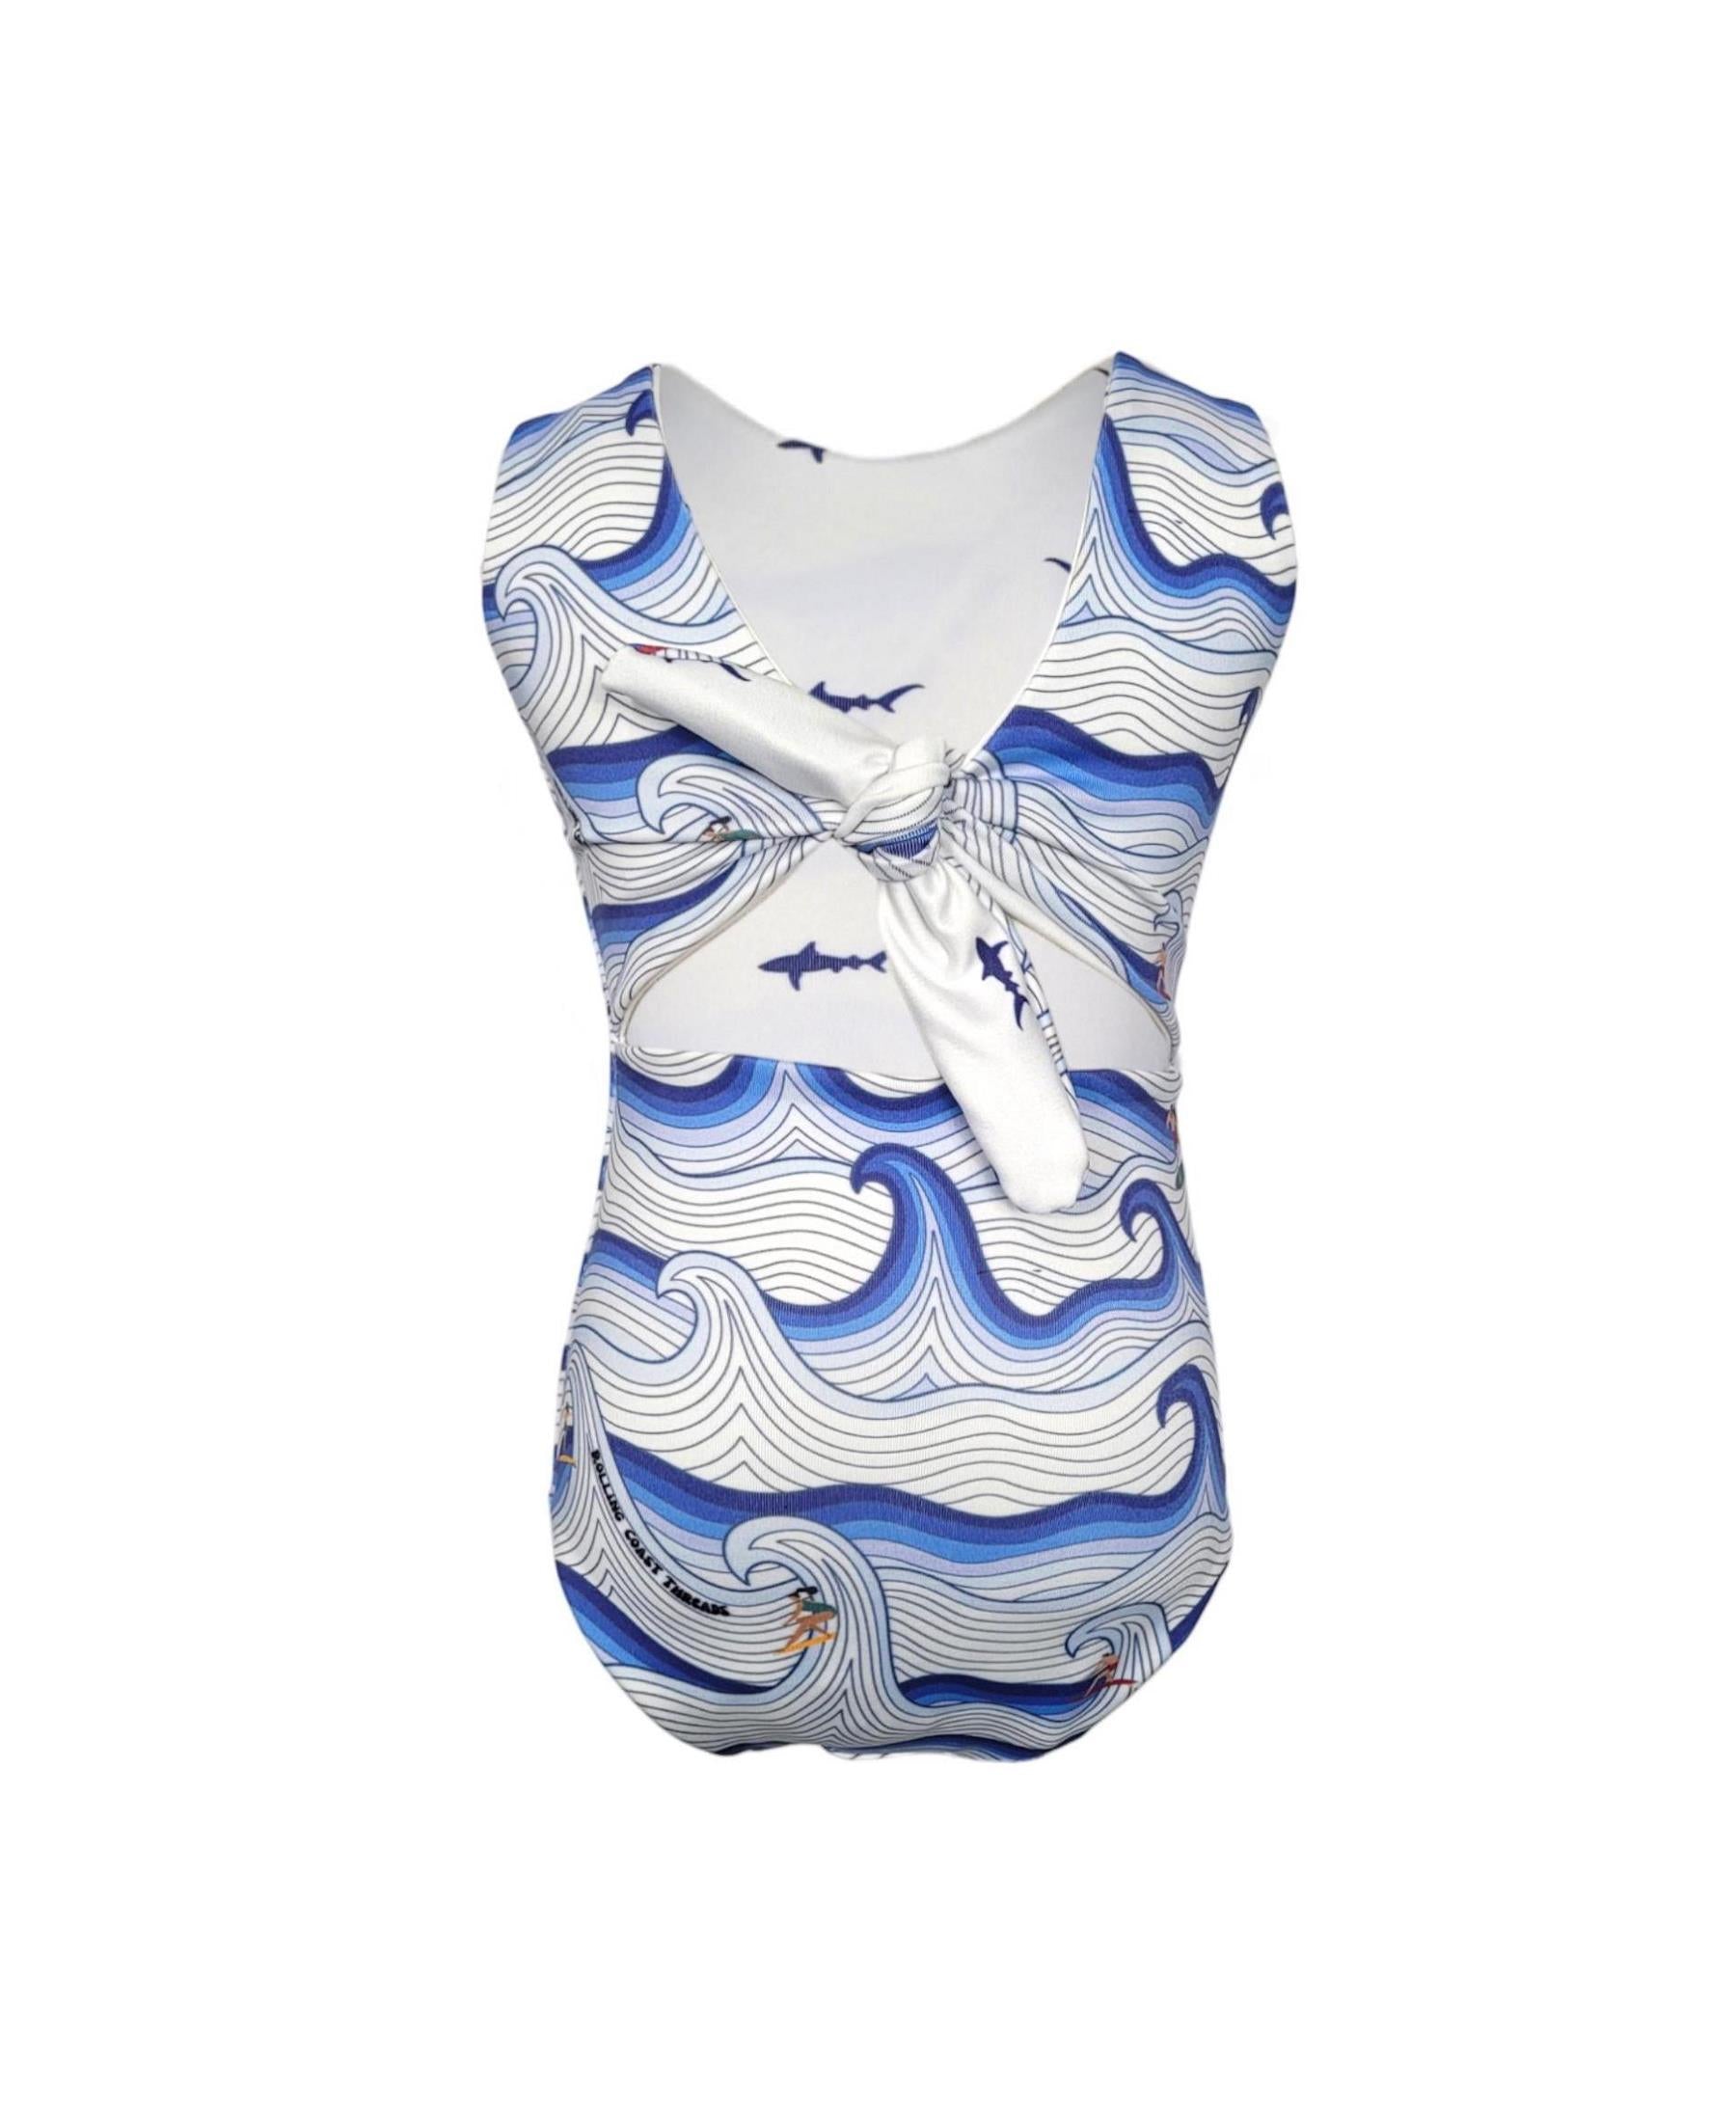 Girls reversible swimsuit. Surfers on white and blue waves.